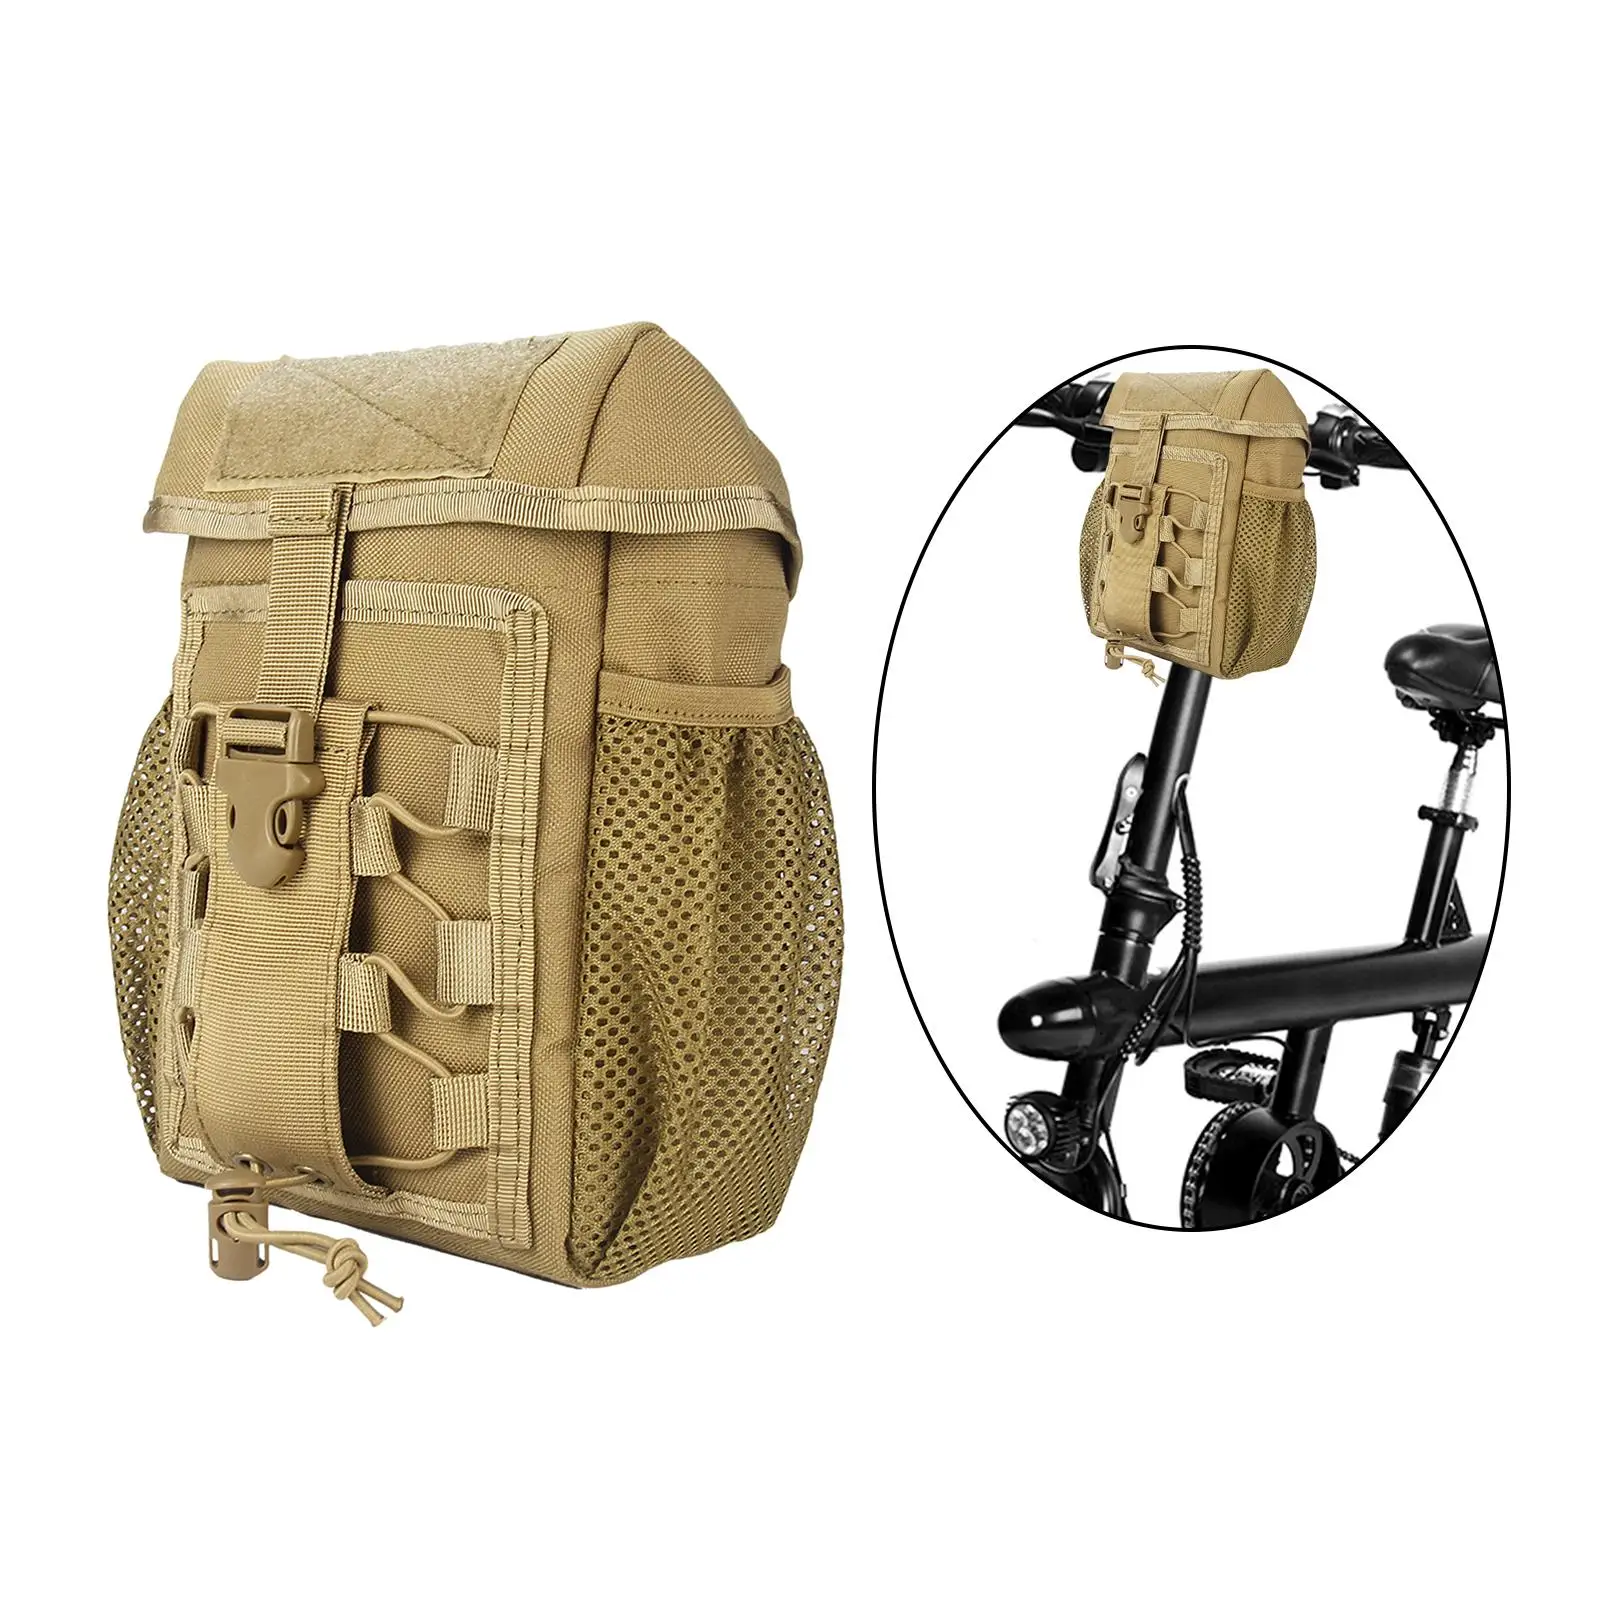 Multi-Pocket Tactical Waist Pack Molle Pouch Accessories Army Organizer Emergency Survival Car Seat Back for Camping First Aid